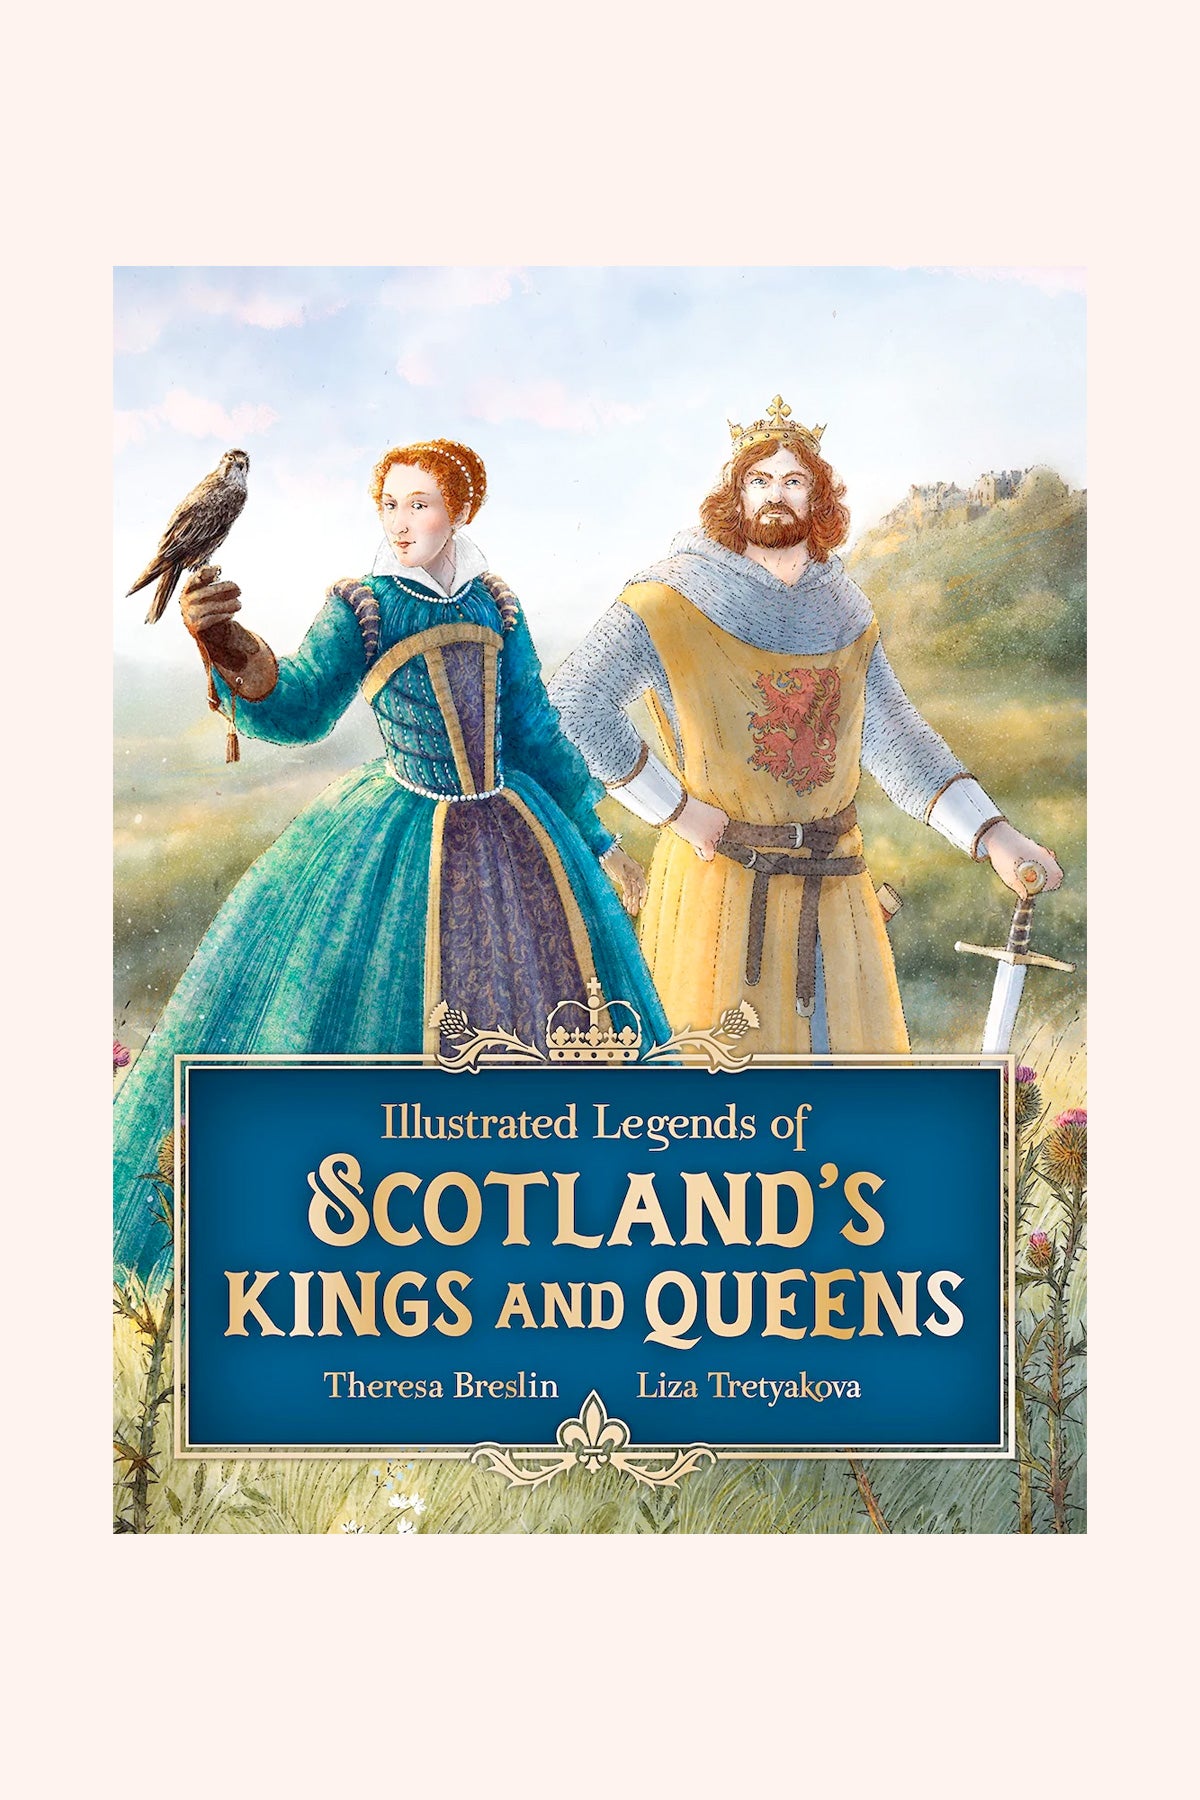 Illustrated Legends of Scotland's Kings and Queens